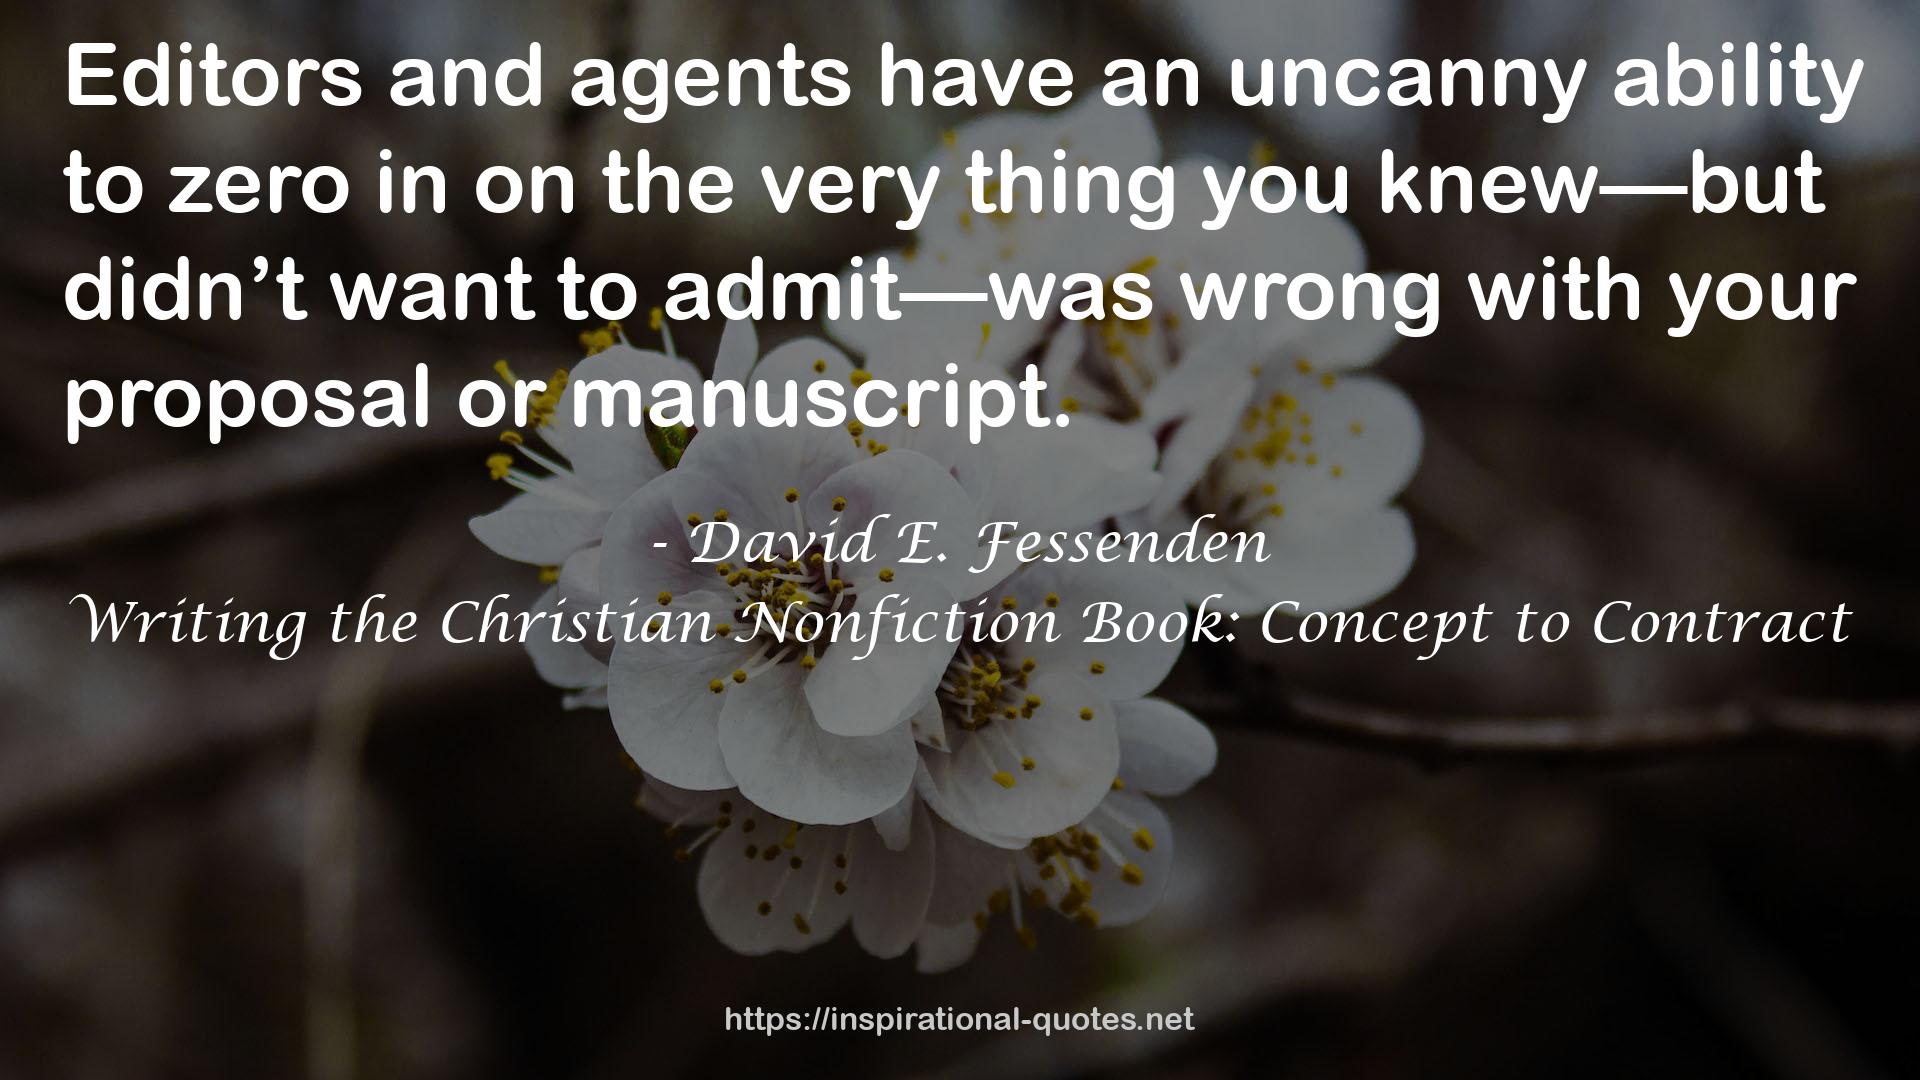 Writing the Christian Nonfiction Book: Concept to Contract QUOTES